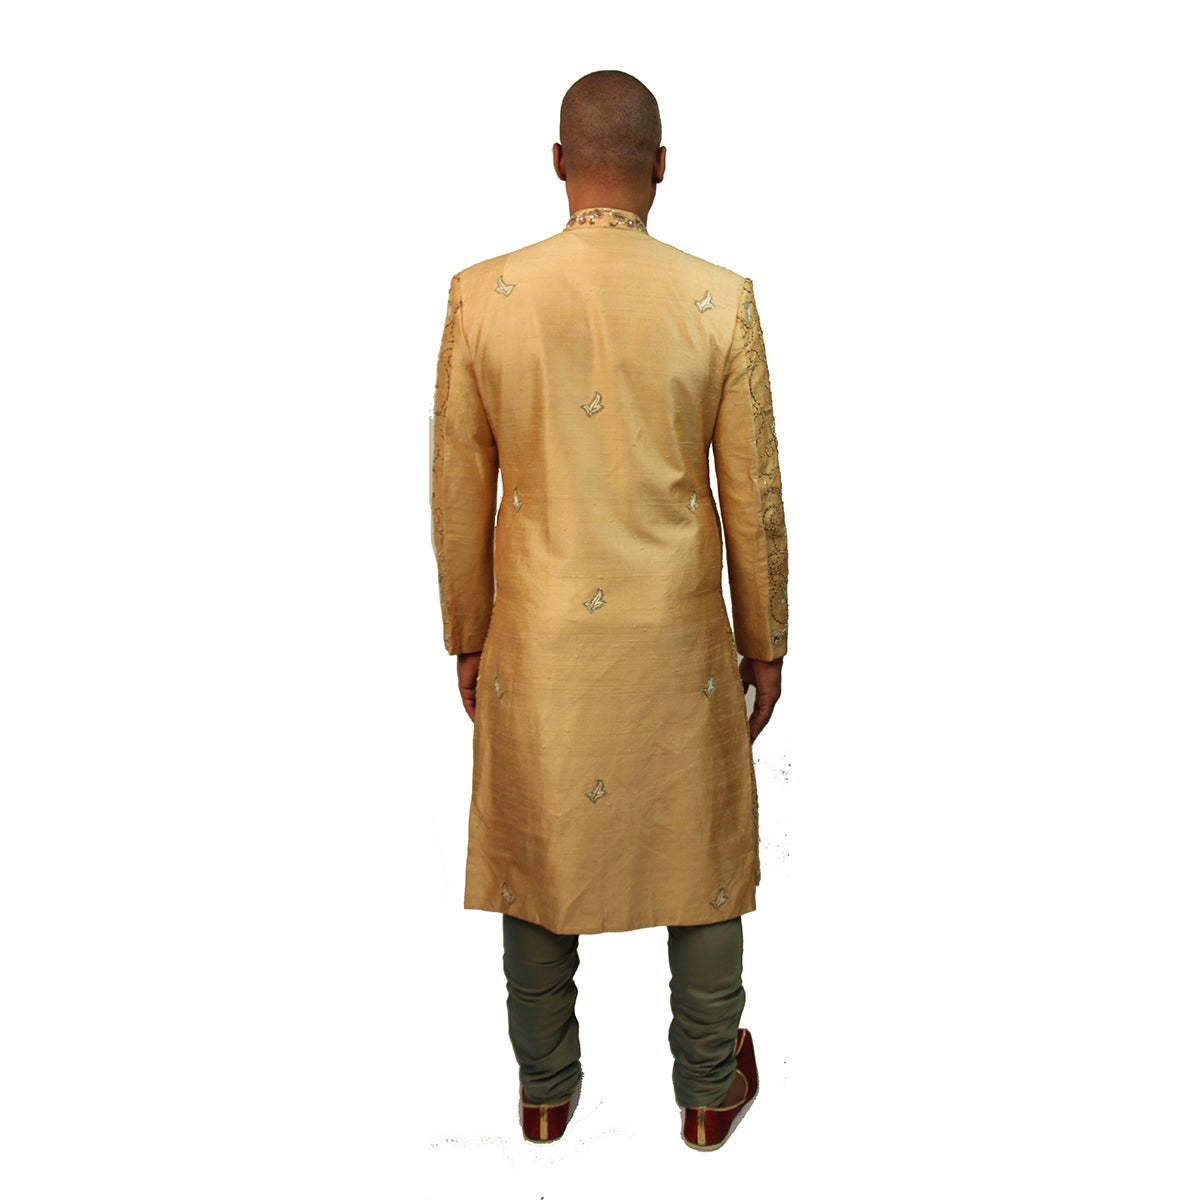 VM Gold Sherwani with Gold Embroidery - Vintage India NYC